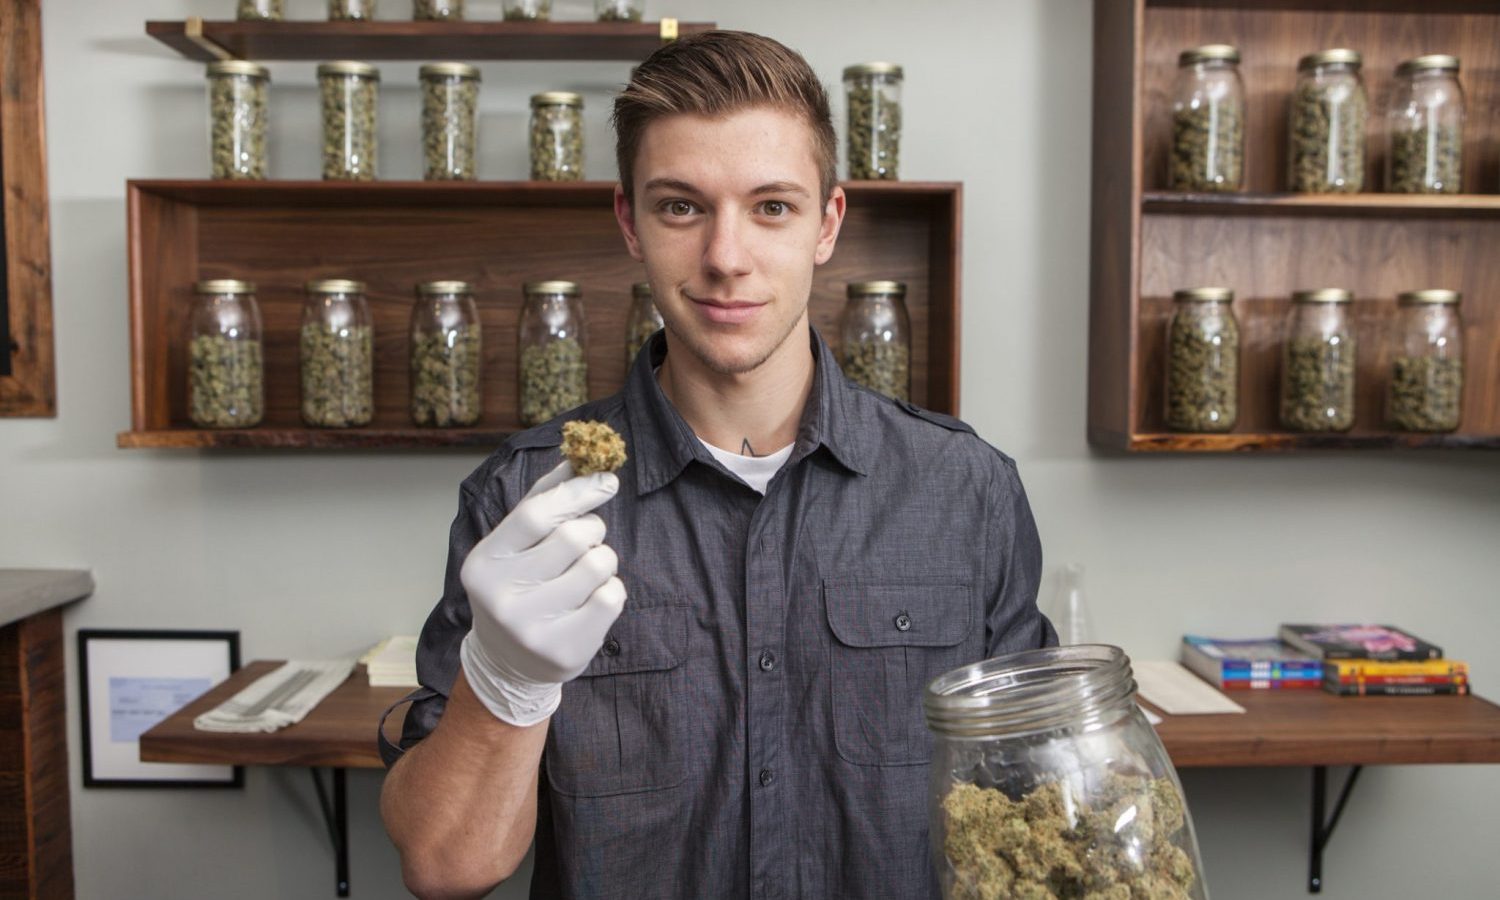 Should Budtenders Be Required To Educate Public Over Health Effects Of Cannabis?